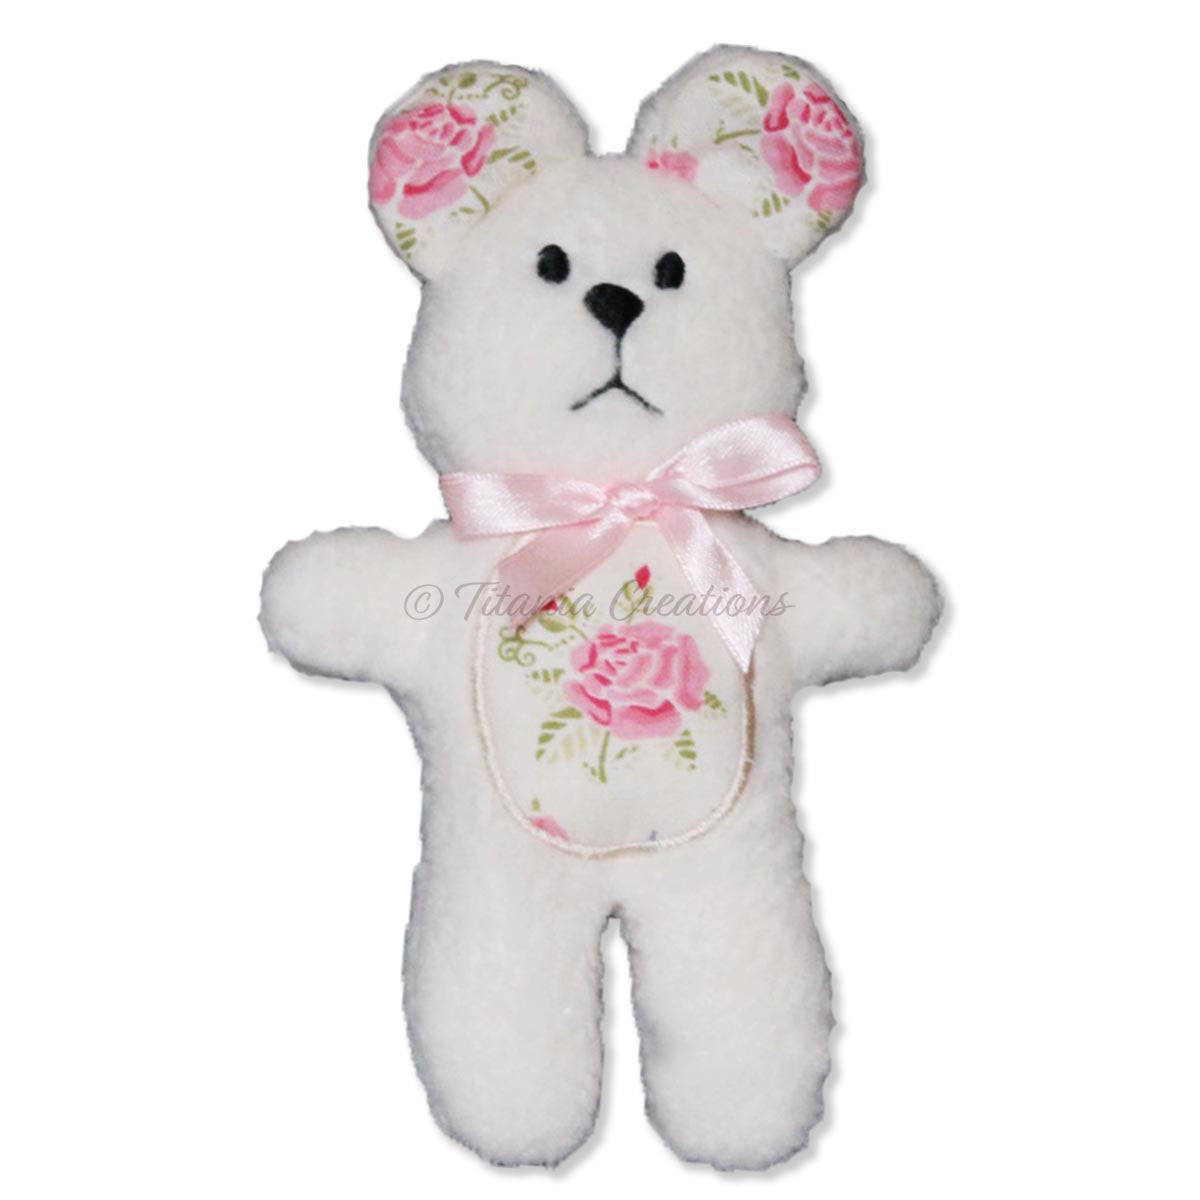 Download Ith Little Teddy 5x7 6x10 Titania Creations